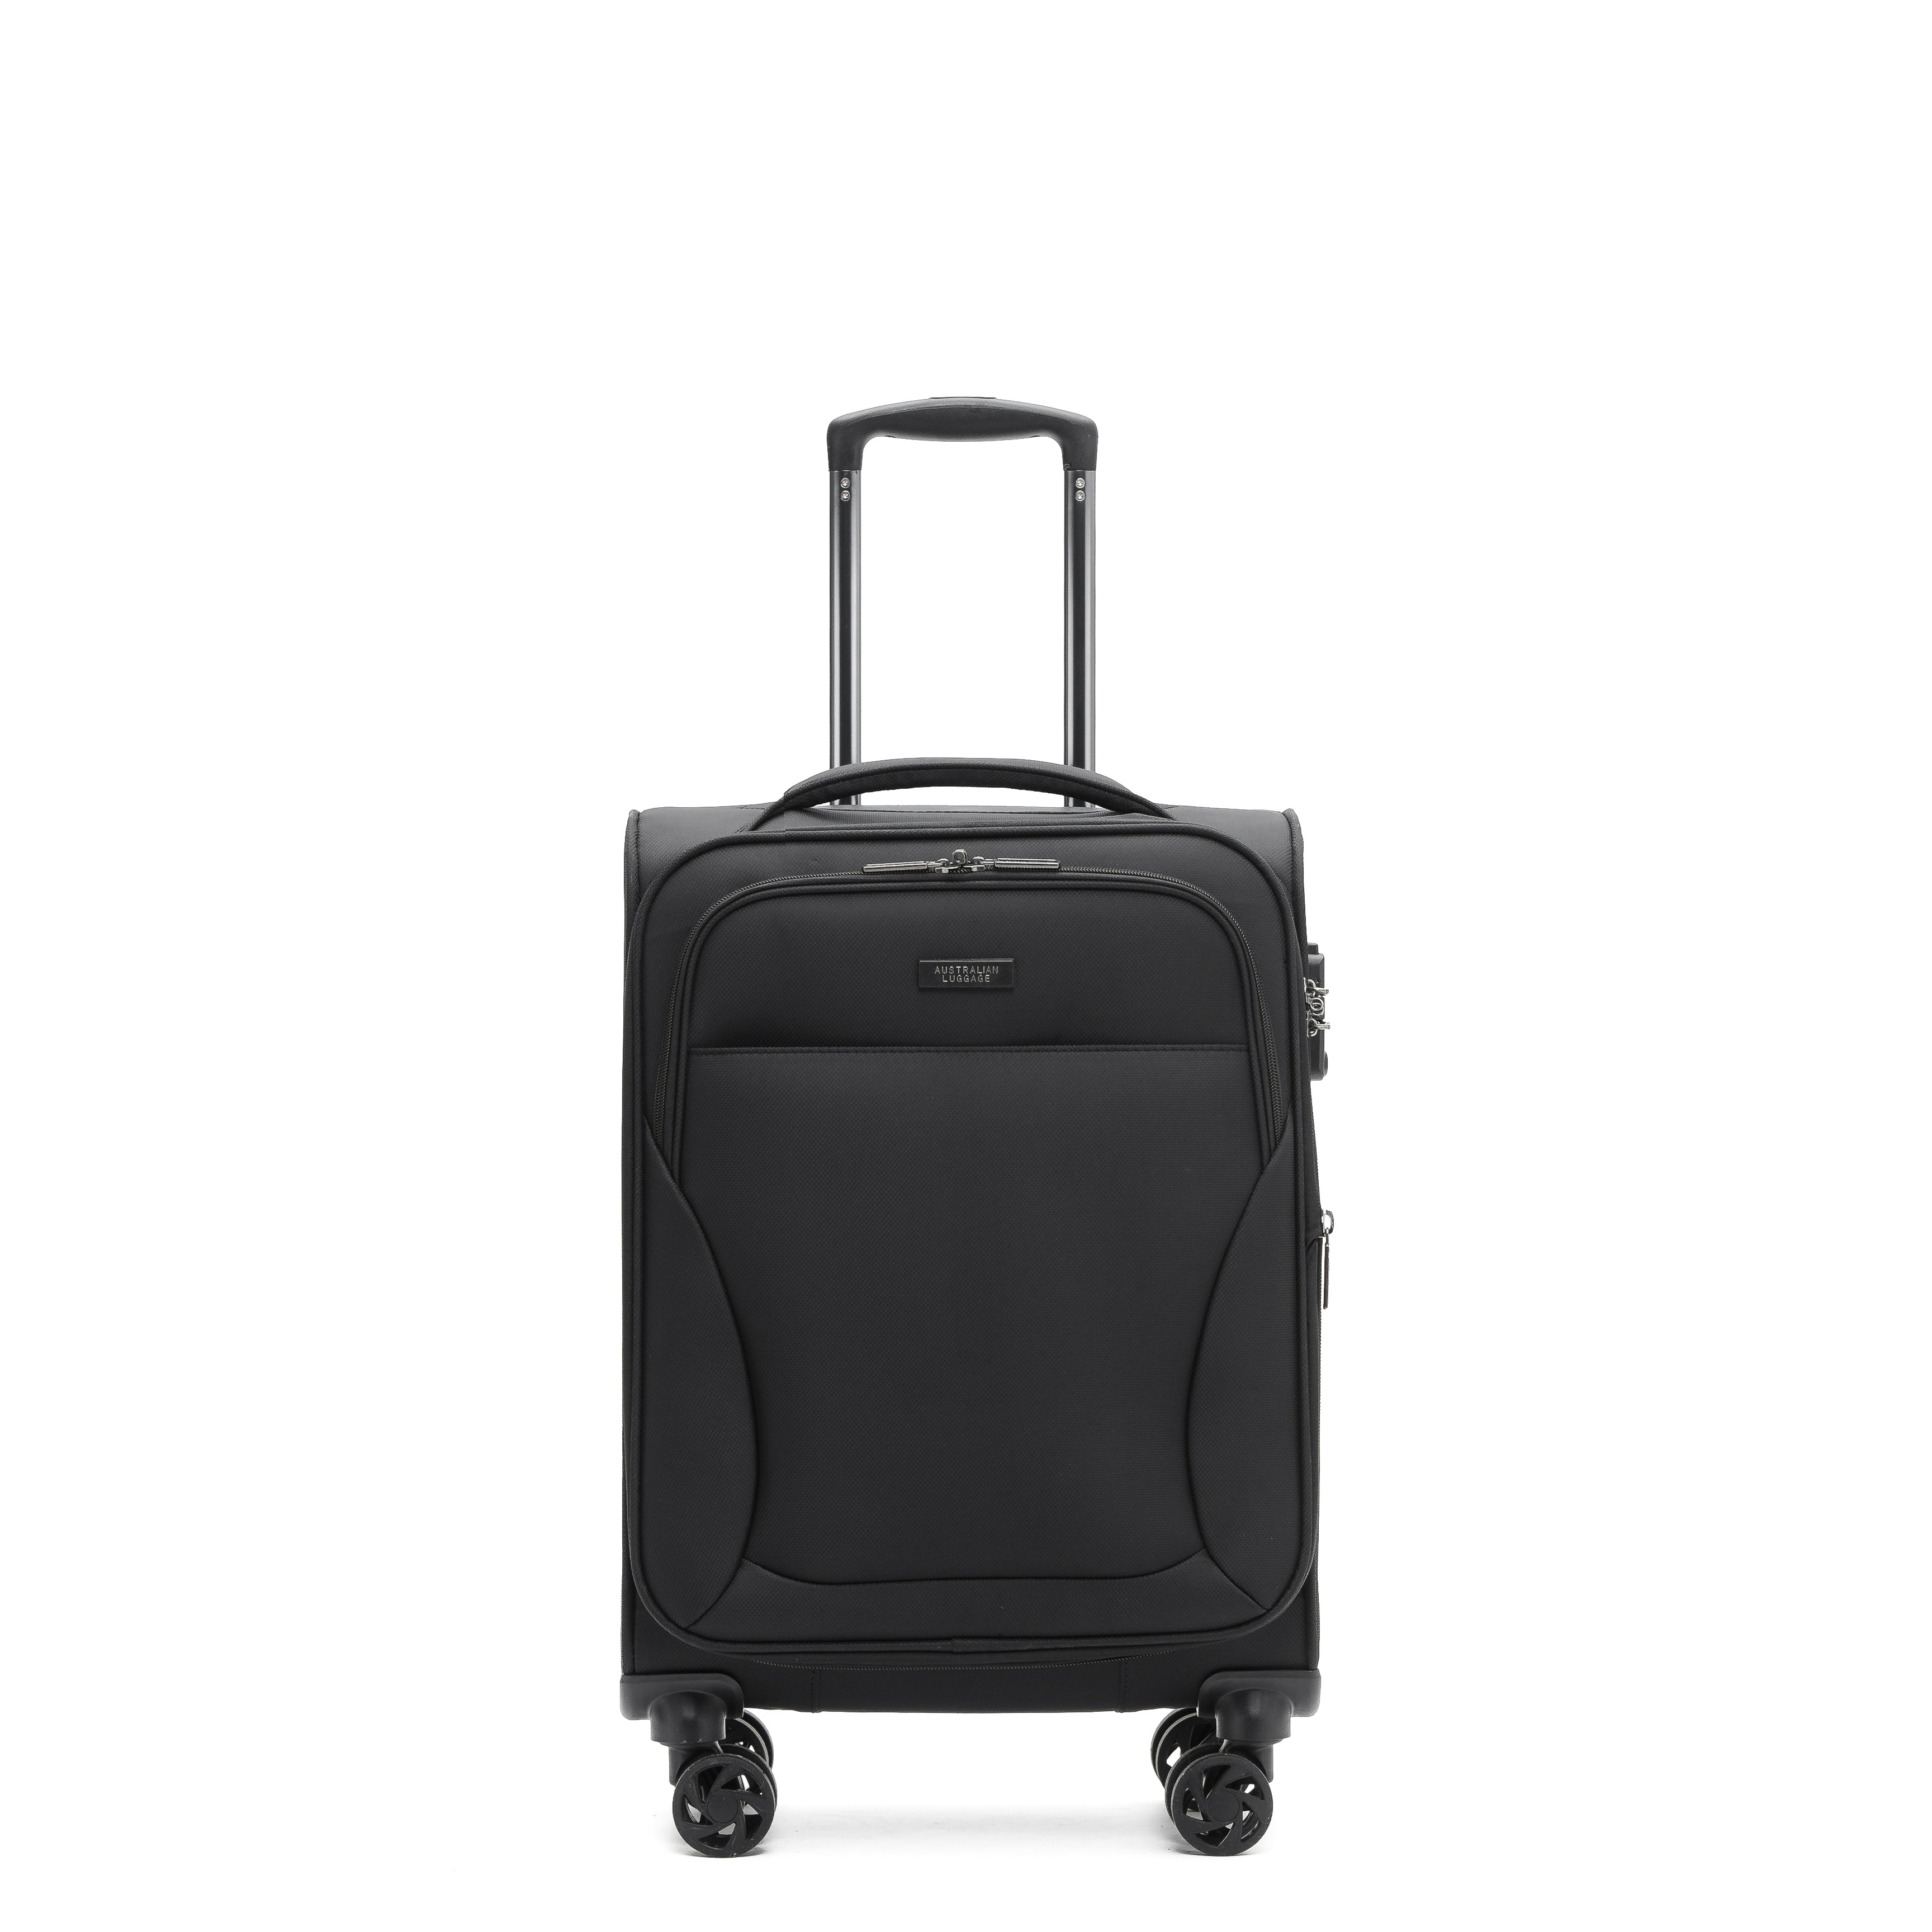 AUS LUGGAGE - WINGS Trolley Case 20in Small - BLACK-1